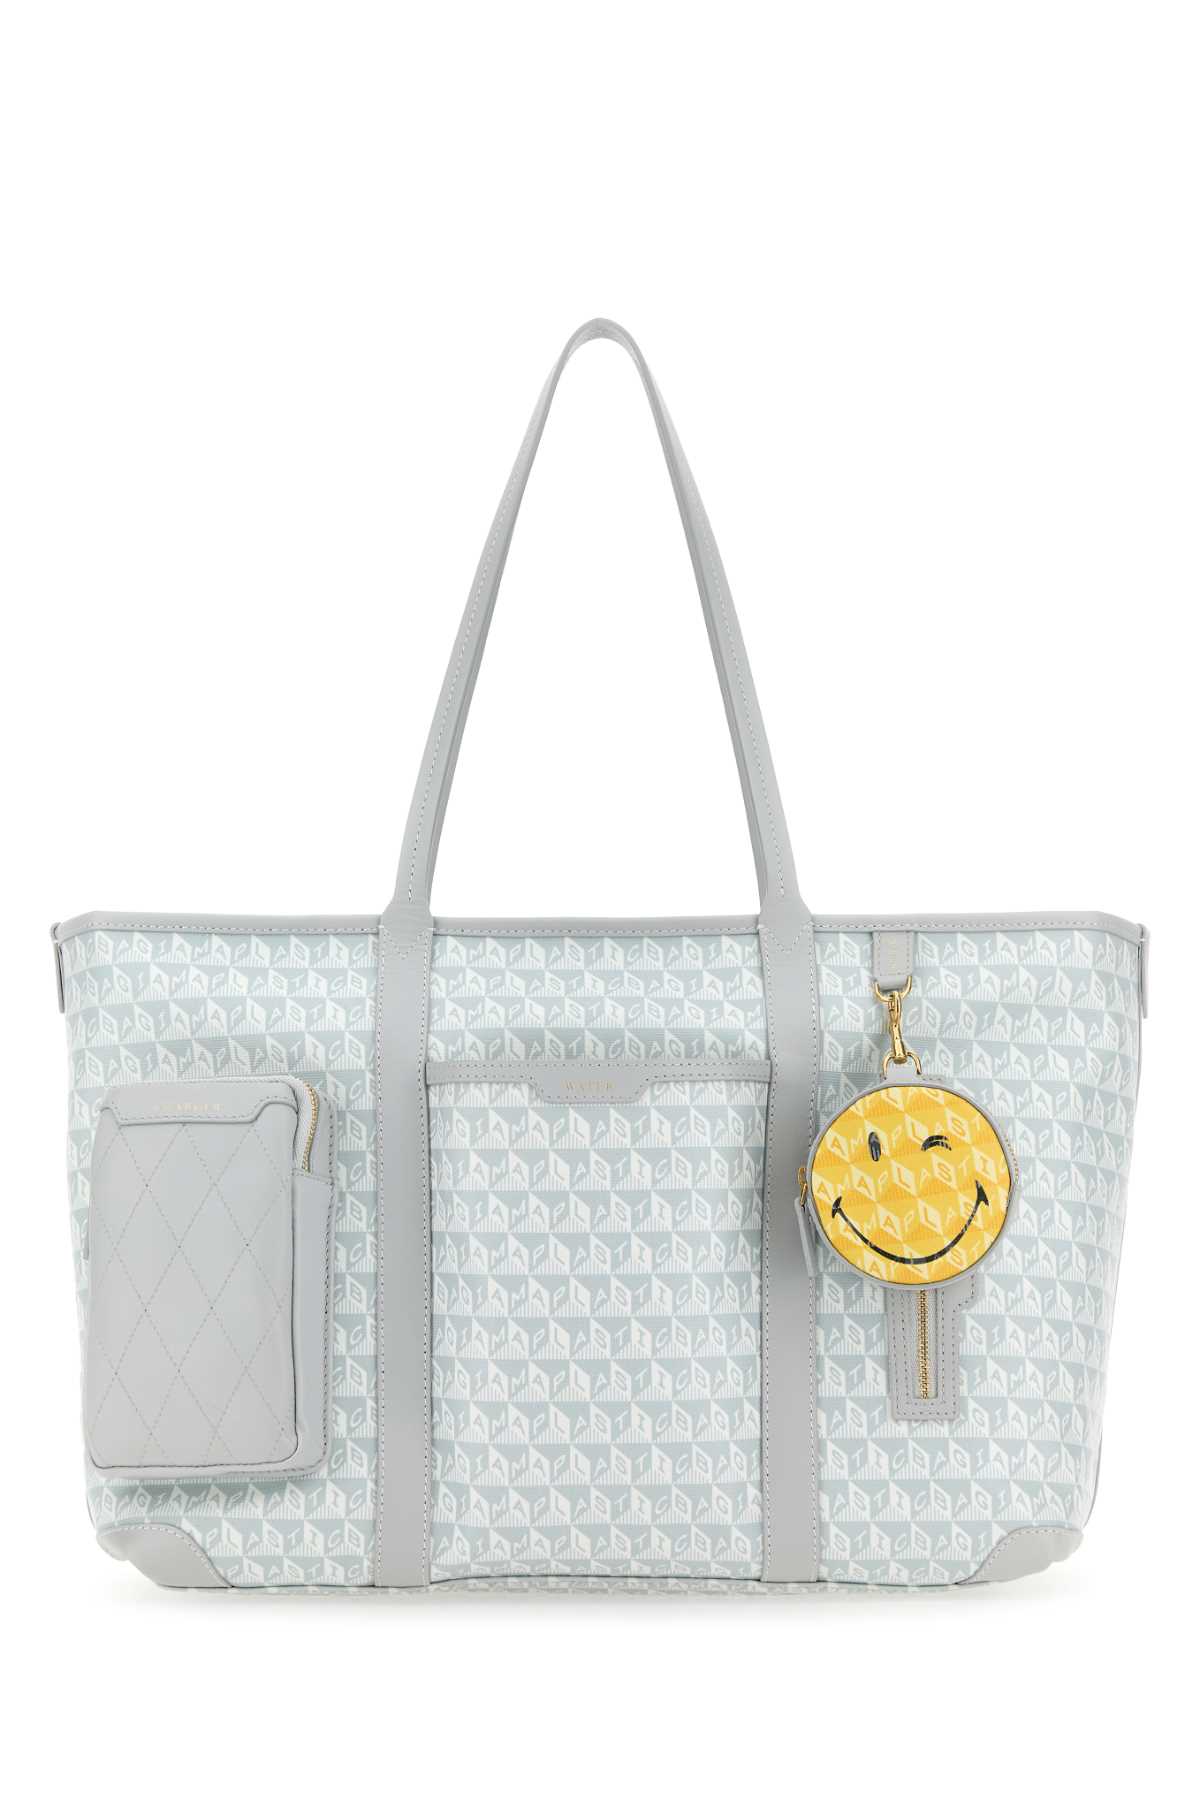 Anya Hindmarch Printed Canvas I Am A Plastic Bag Inflight Shopping Bag In Frost